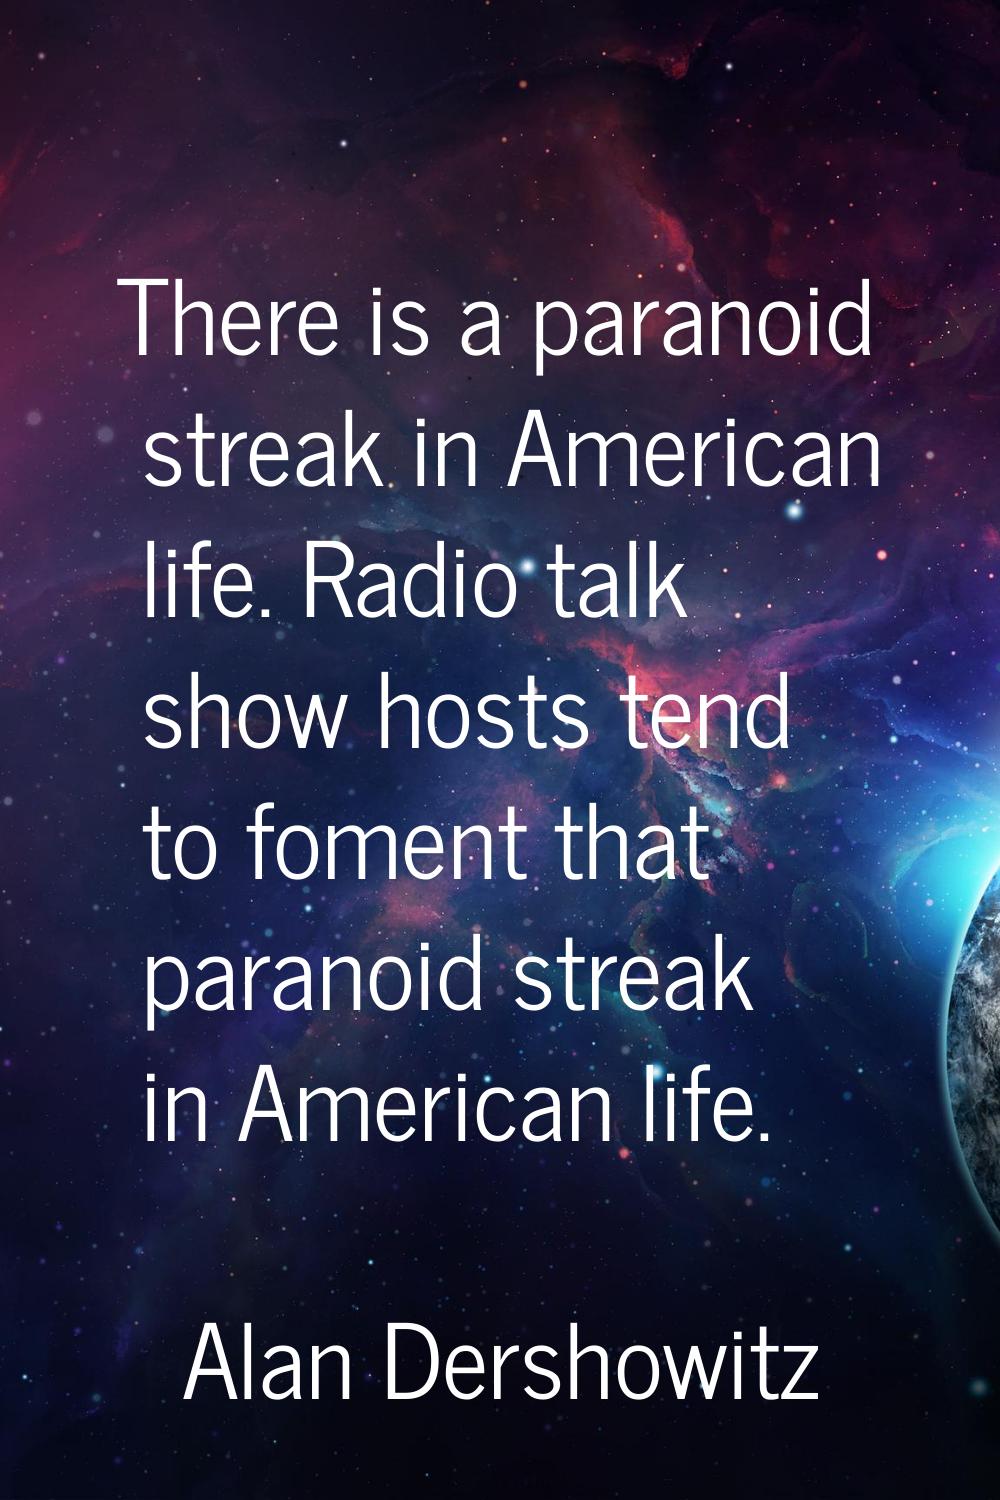 There is a paranoid streak in American life. Radio talk show hosts tend to foment that paranoid str